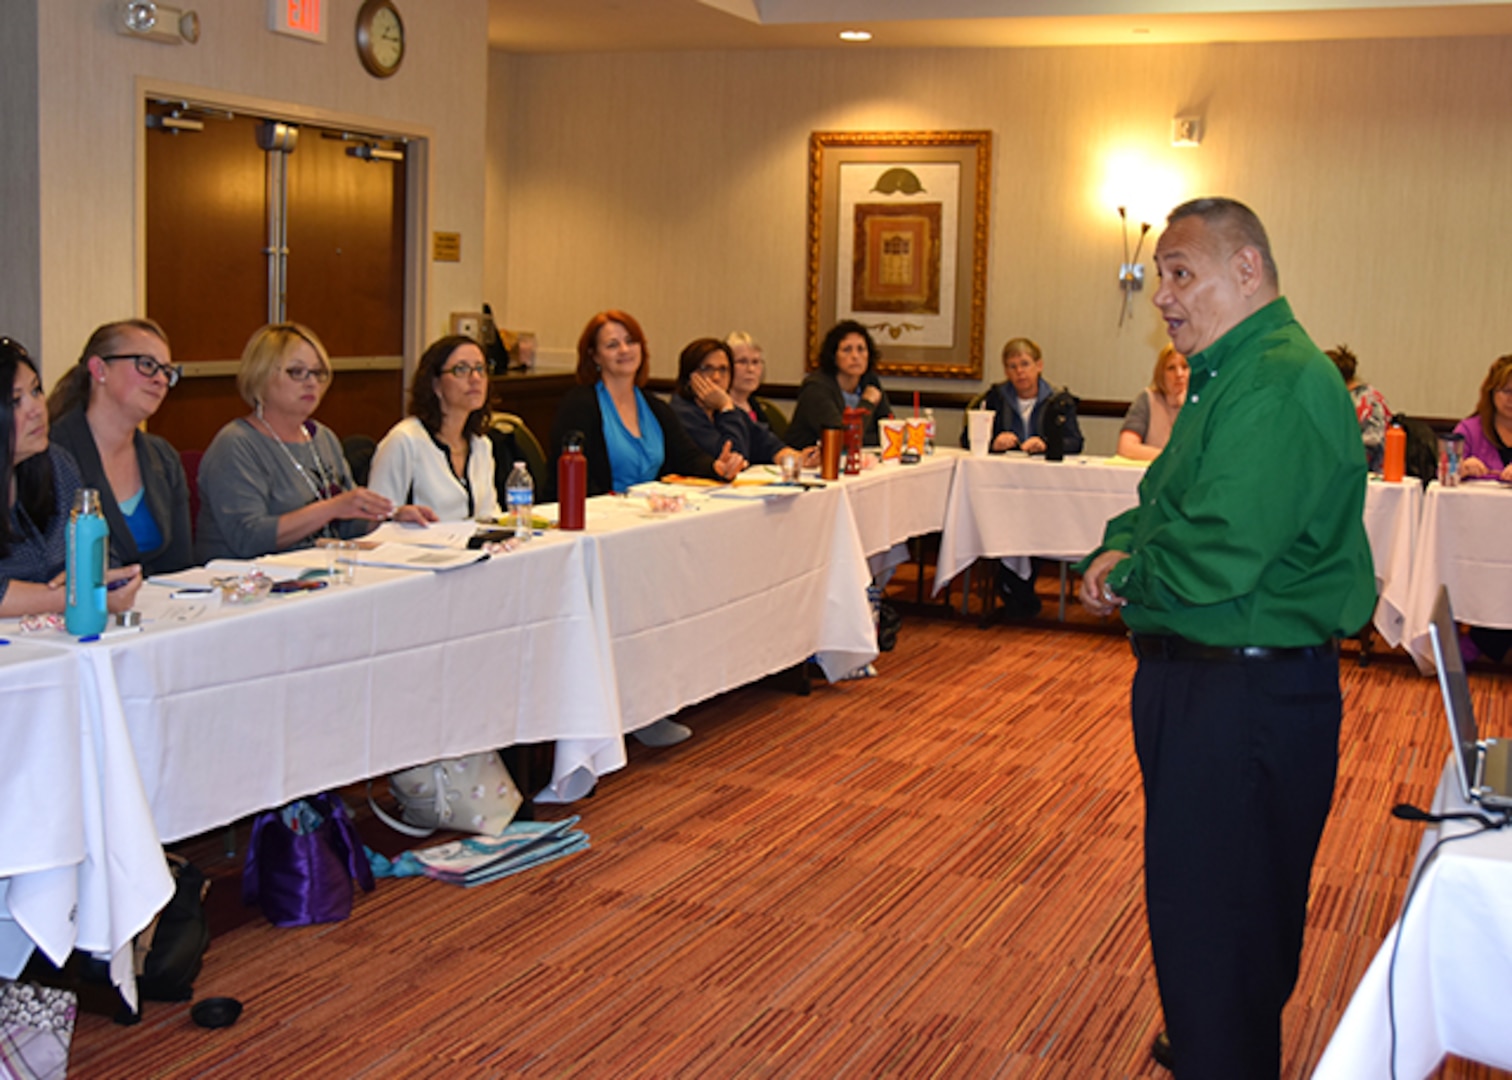 Dr. Adan Penilla, from Colorado State University, facilitates a workshop which focused on understanding differences in how other cultures communicate through sign language April 8, 2016 in Chester, Virginia. The event, which was coordinated and hosted by the Defense Logistics Agency Aviation’s Equal Employment Opportunity and Diversity Office included sign language interpreters from the Department of Defense, other federal organizations and Chesterfield County Public Schools.  (Photo by Jackie Roberts, DLA Installation Support at Richmond).